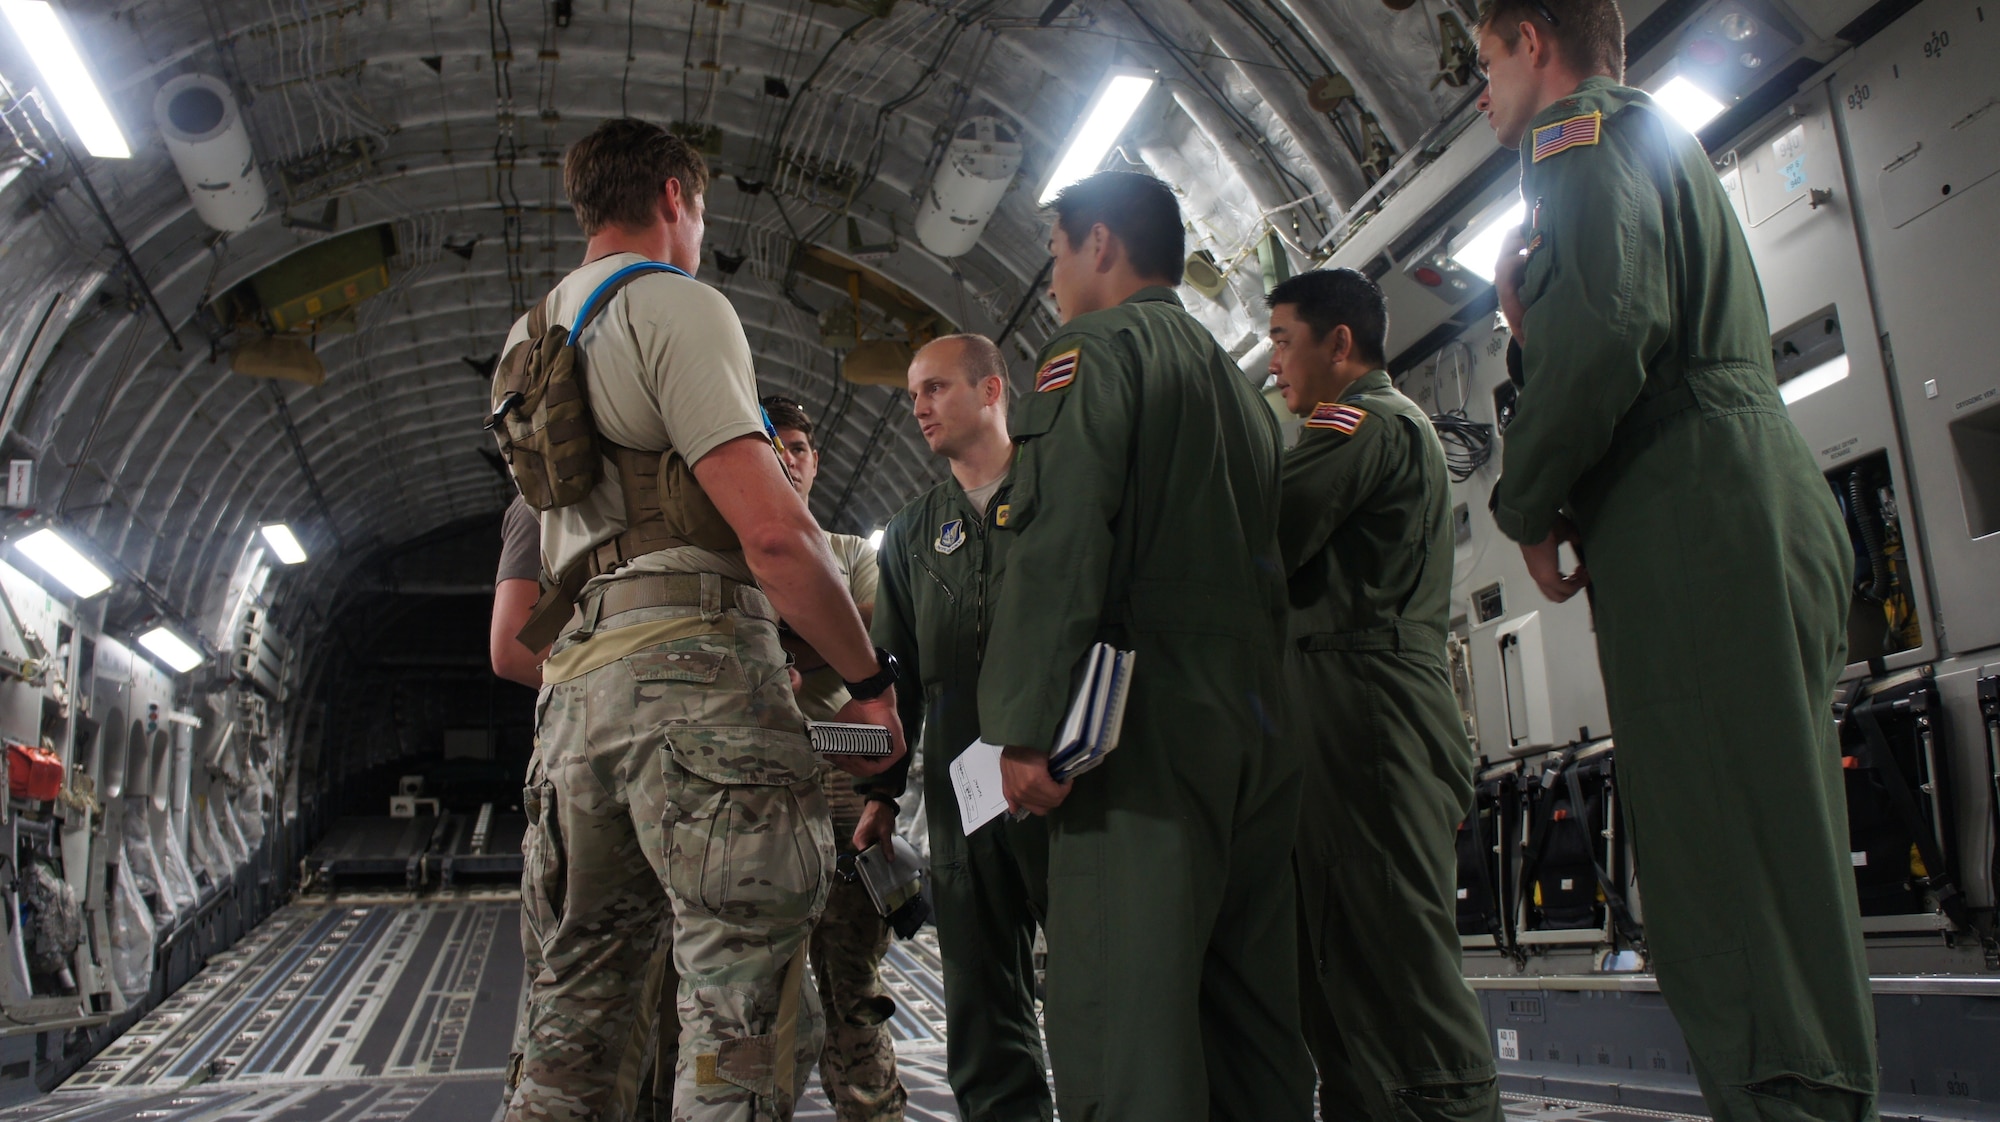 Pararescue jumpers with the 31st Rescue Squadron hold a pre-mission brief with the Air Crew from the Hawaii Air National Guards 204th and the 535th Airlift Squadron before a High Altitude Low Opening air drop during Balikatan 2016, Clark Air Field, Philippines, April 15, 2016. Balikatan, which means shoulder to shoulder in Filipino, is an annual bilateral training exercise aimed at improving the ability of Philippine and U.S. military forces to work together during planning, contingency and humanitarian assistance and disaster relief operations. (U.S. Air National Guard photo by Tech. Sgt. Andrew Jackson/released)
